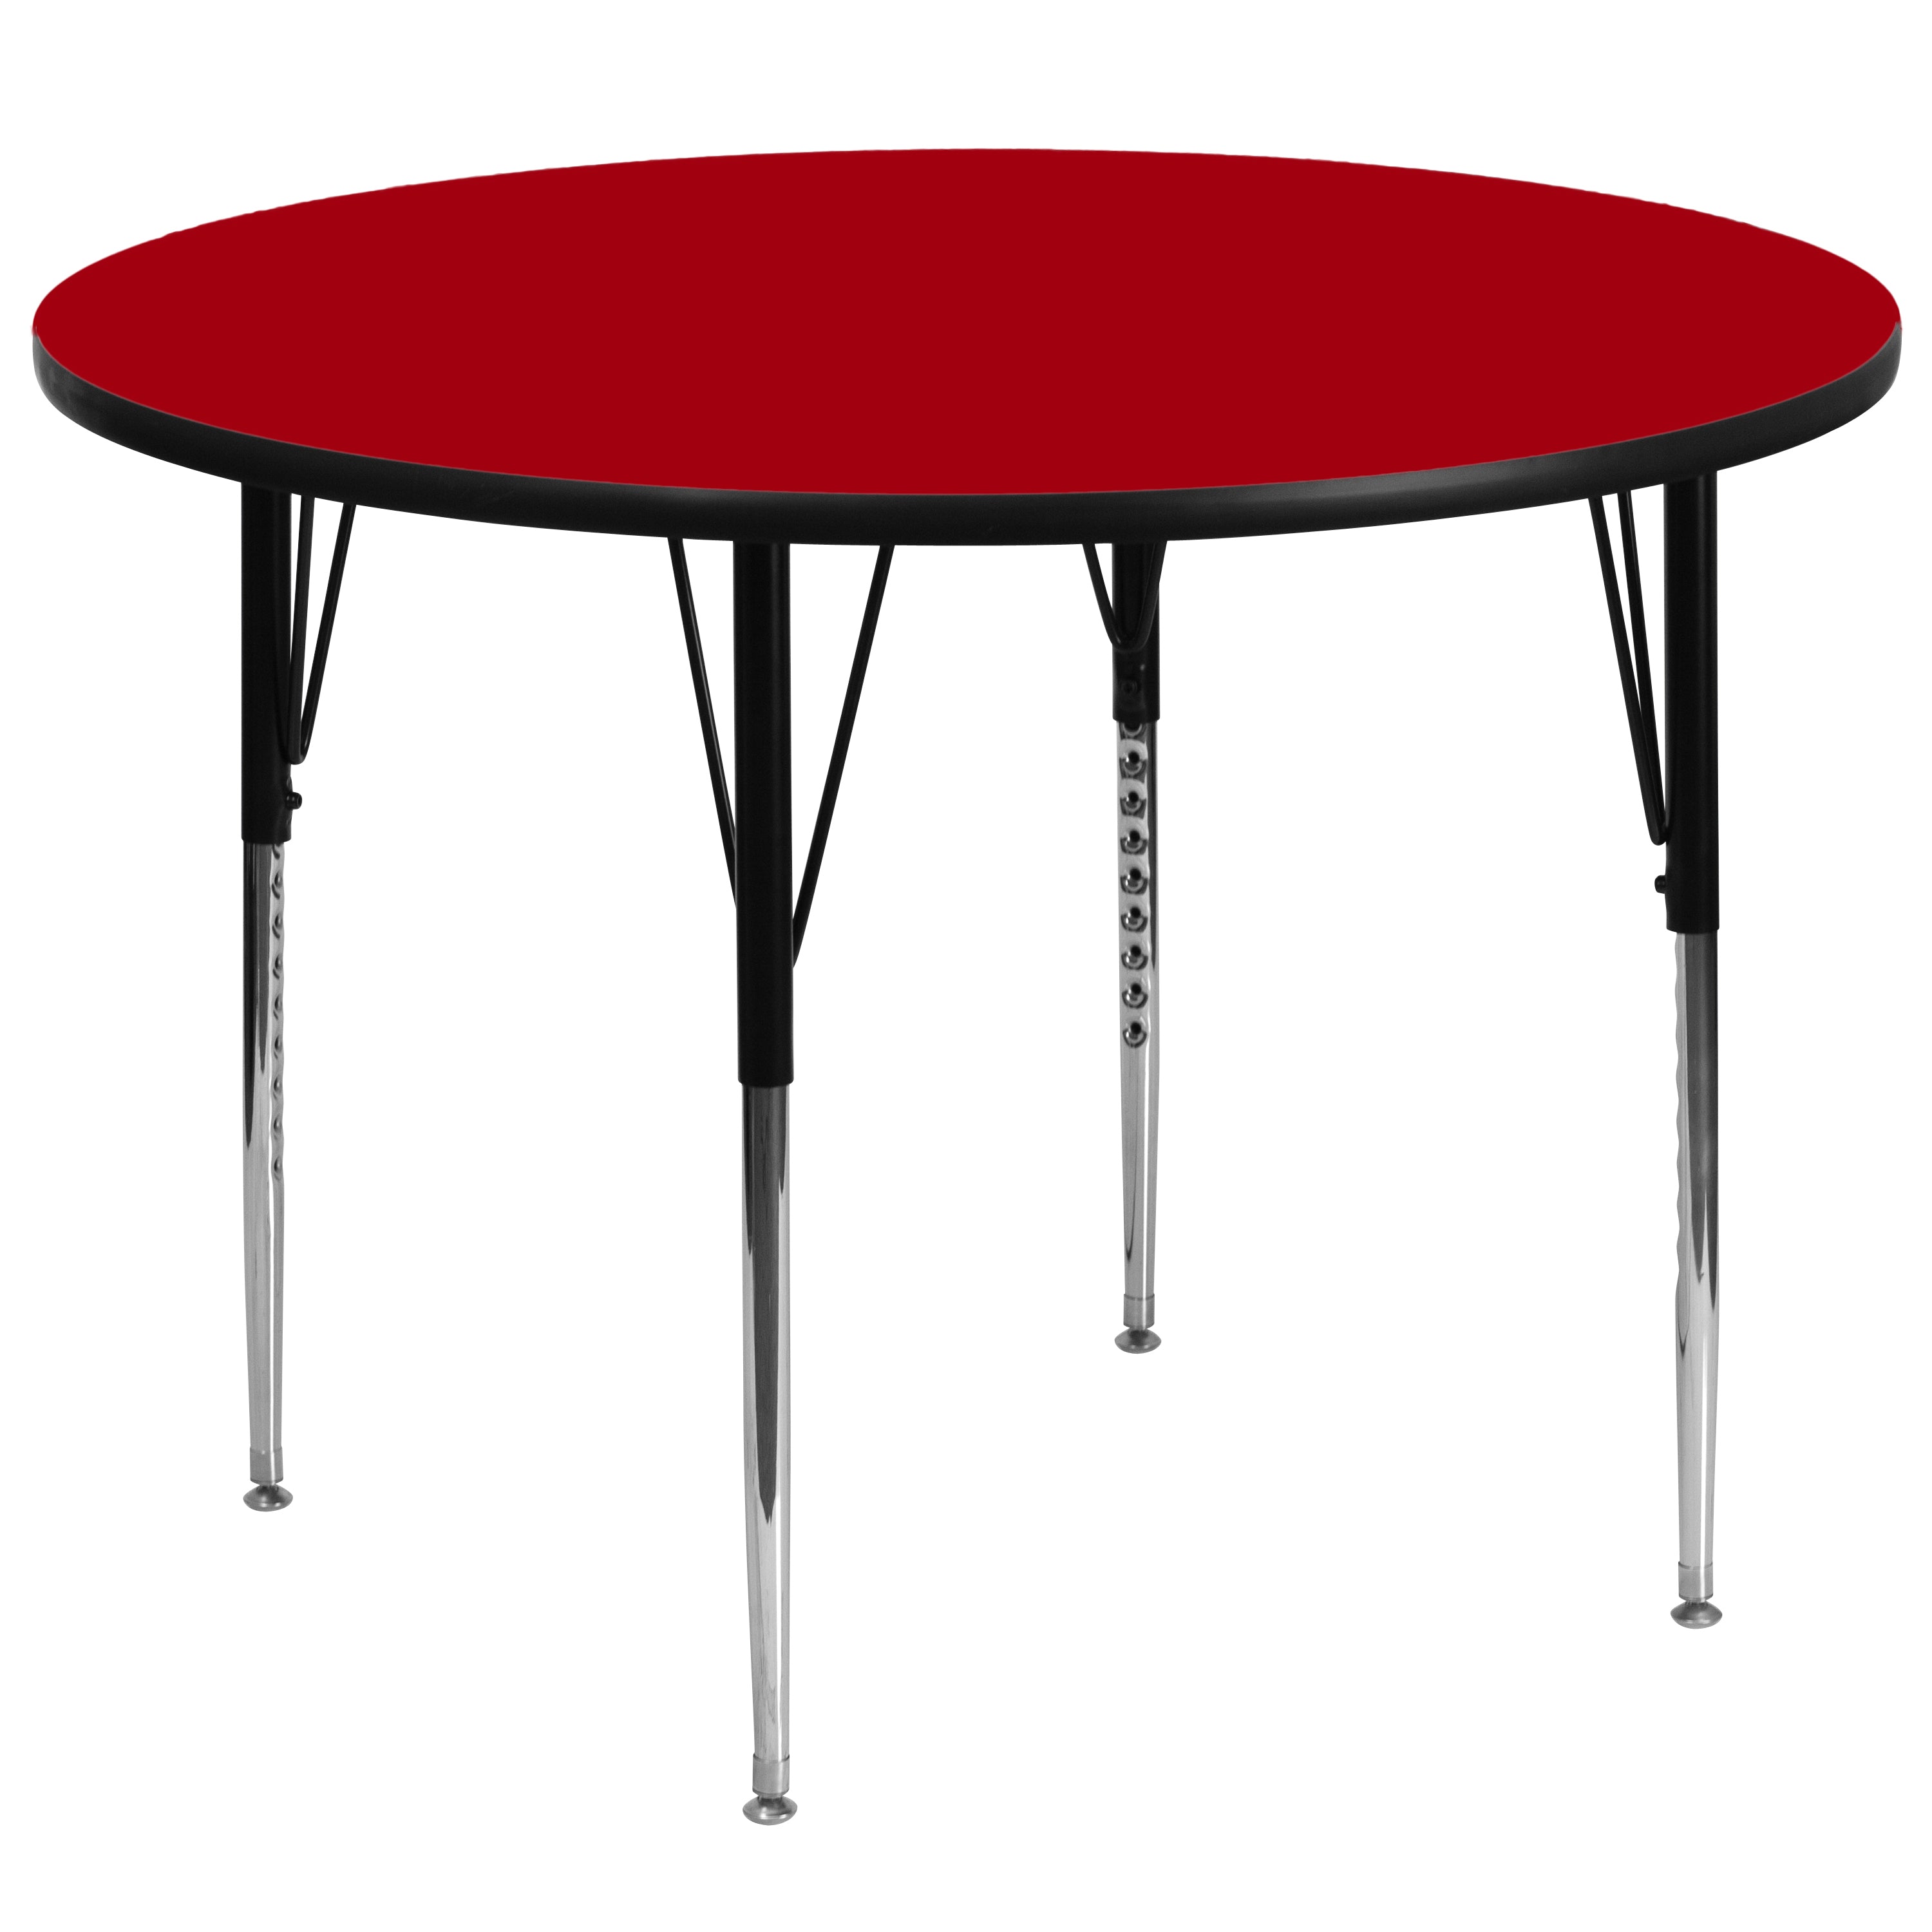 60'' Round Thermal Laminate Activity Table - Standard Height Adjustable Legs-Round Activity Table-Flash Furniture-Wall2Wall Furnishings